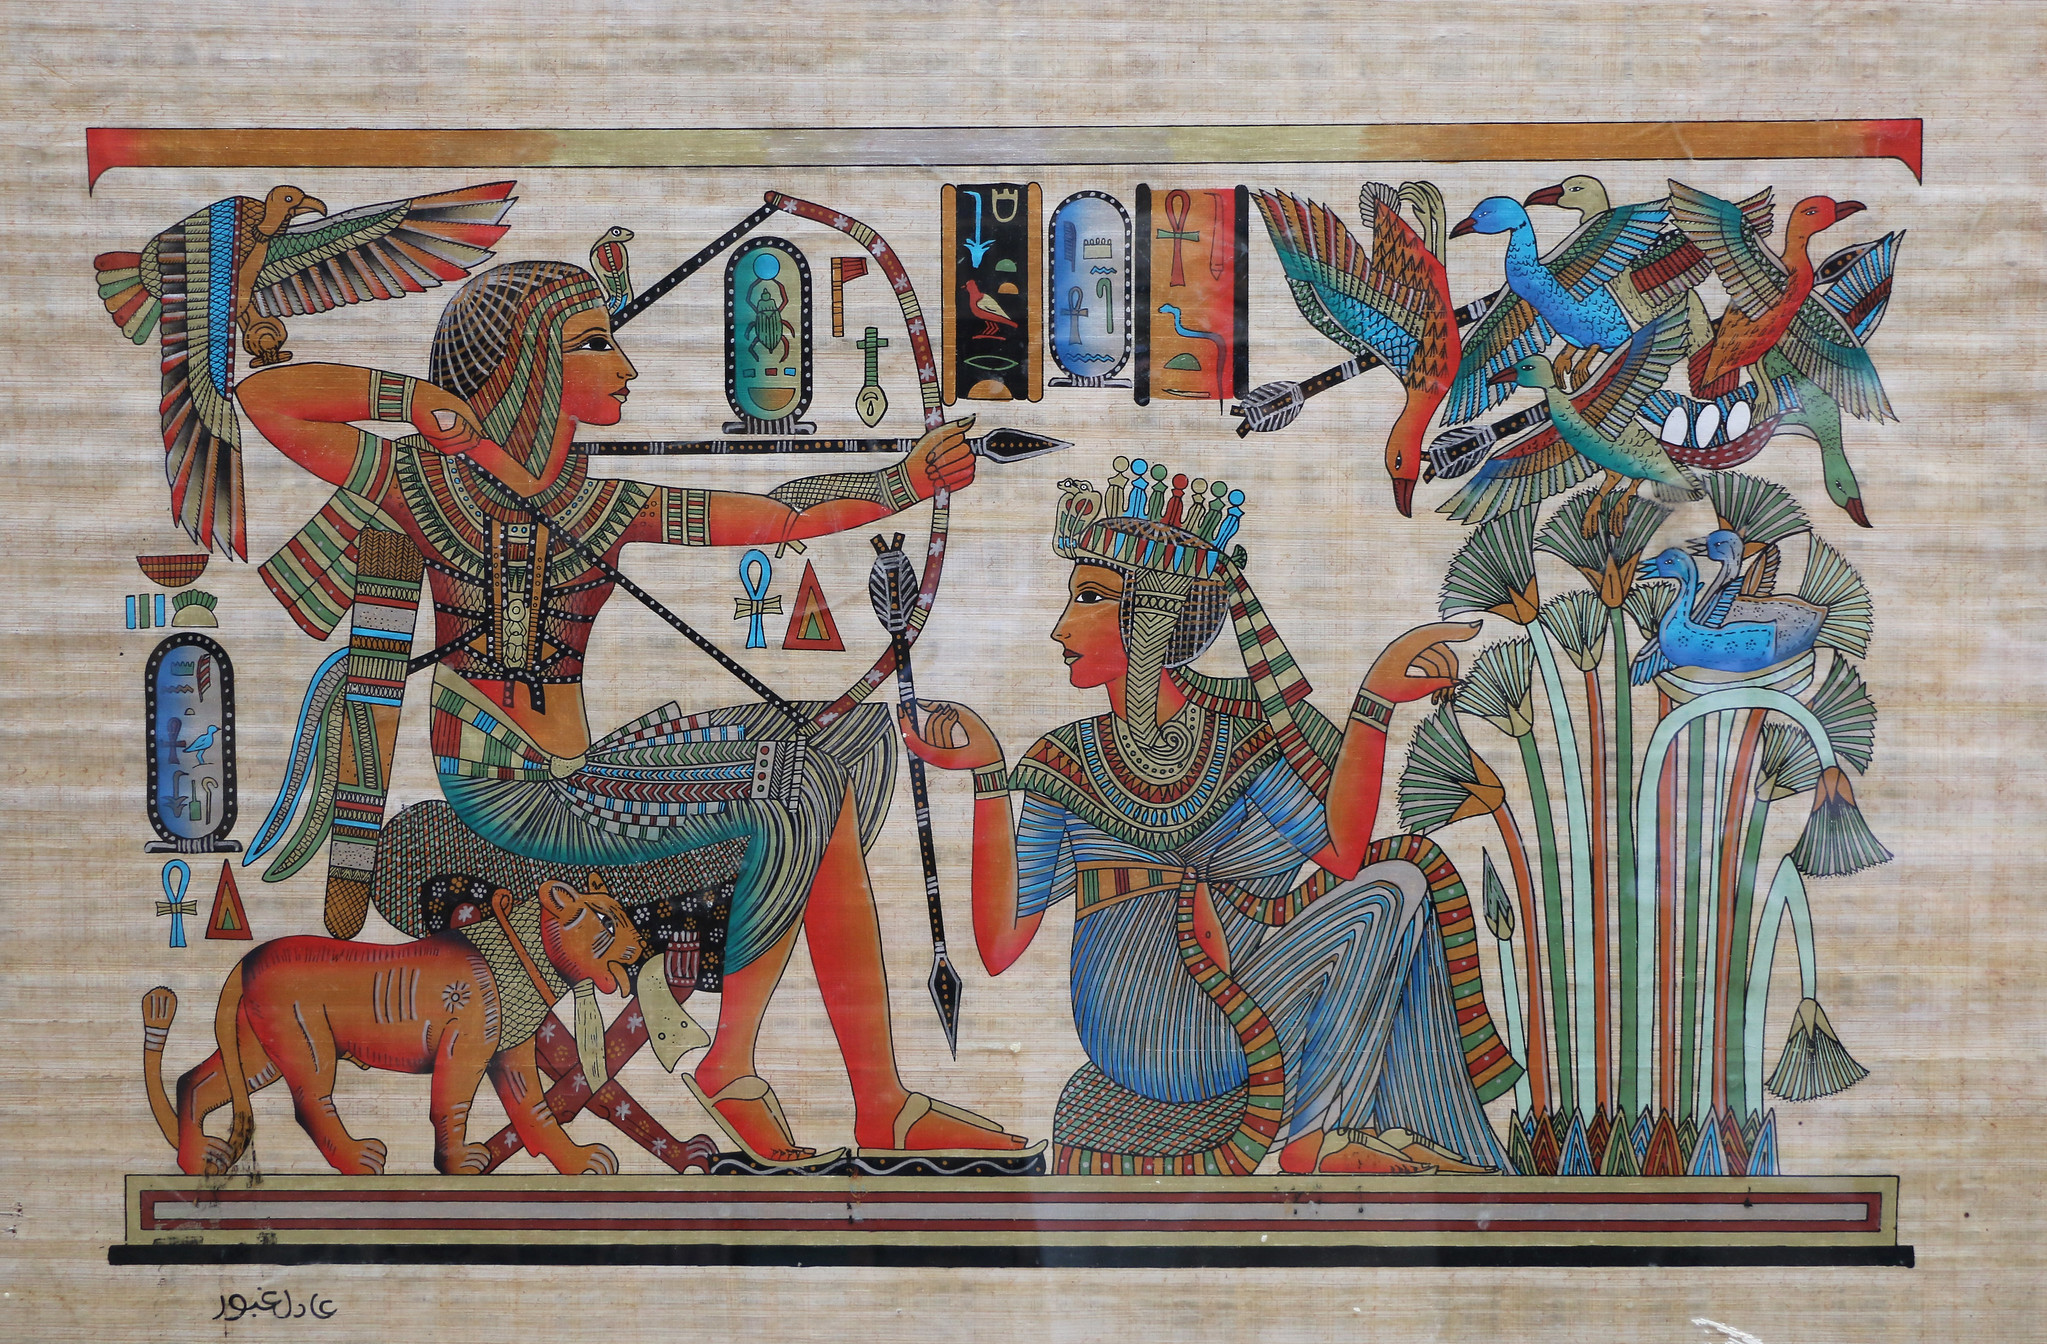 Papyrus Painting, Bookstore, The Alley of St. George, Coptic Cairo, Egypt.